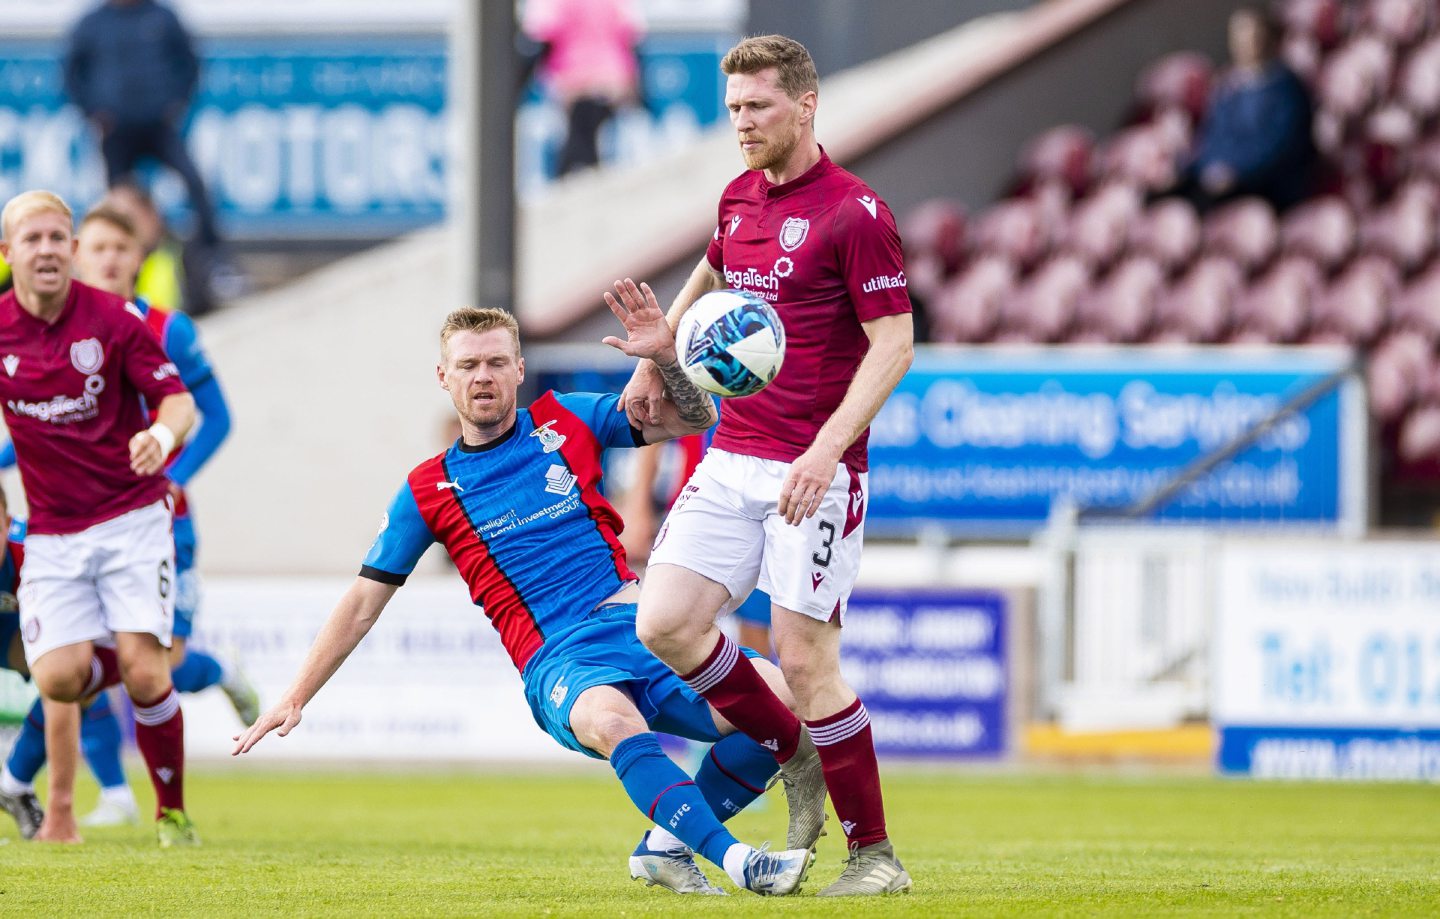 Arbroath's Colin Hamilton had an excellent afternoon at centre-back.